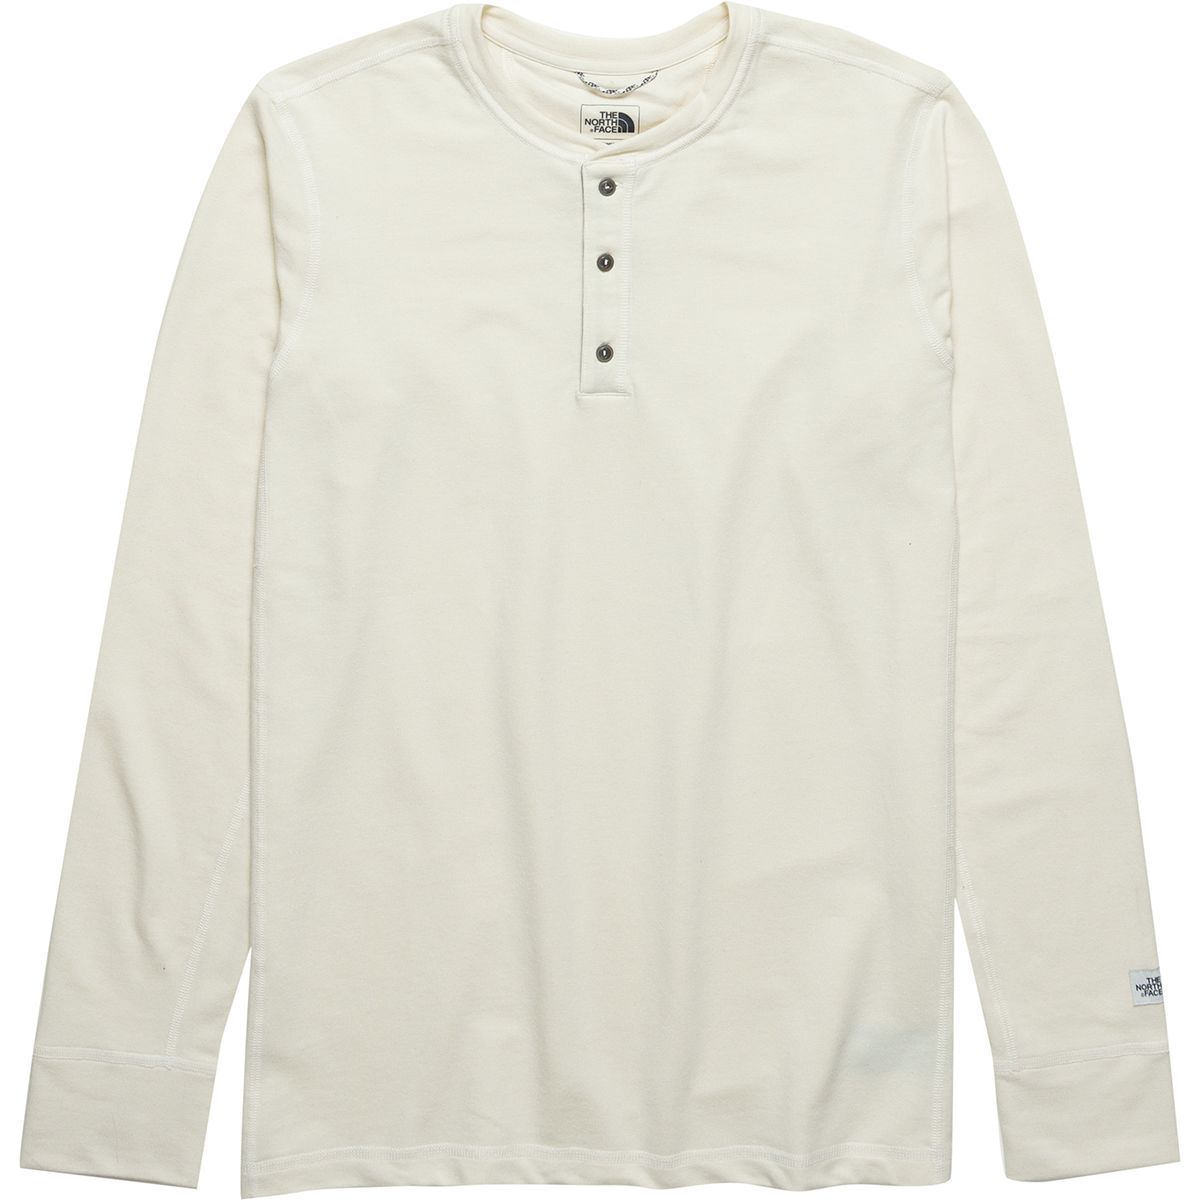 north face henley mens